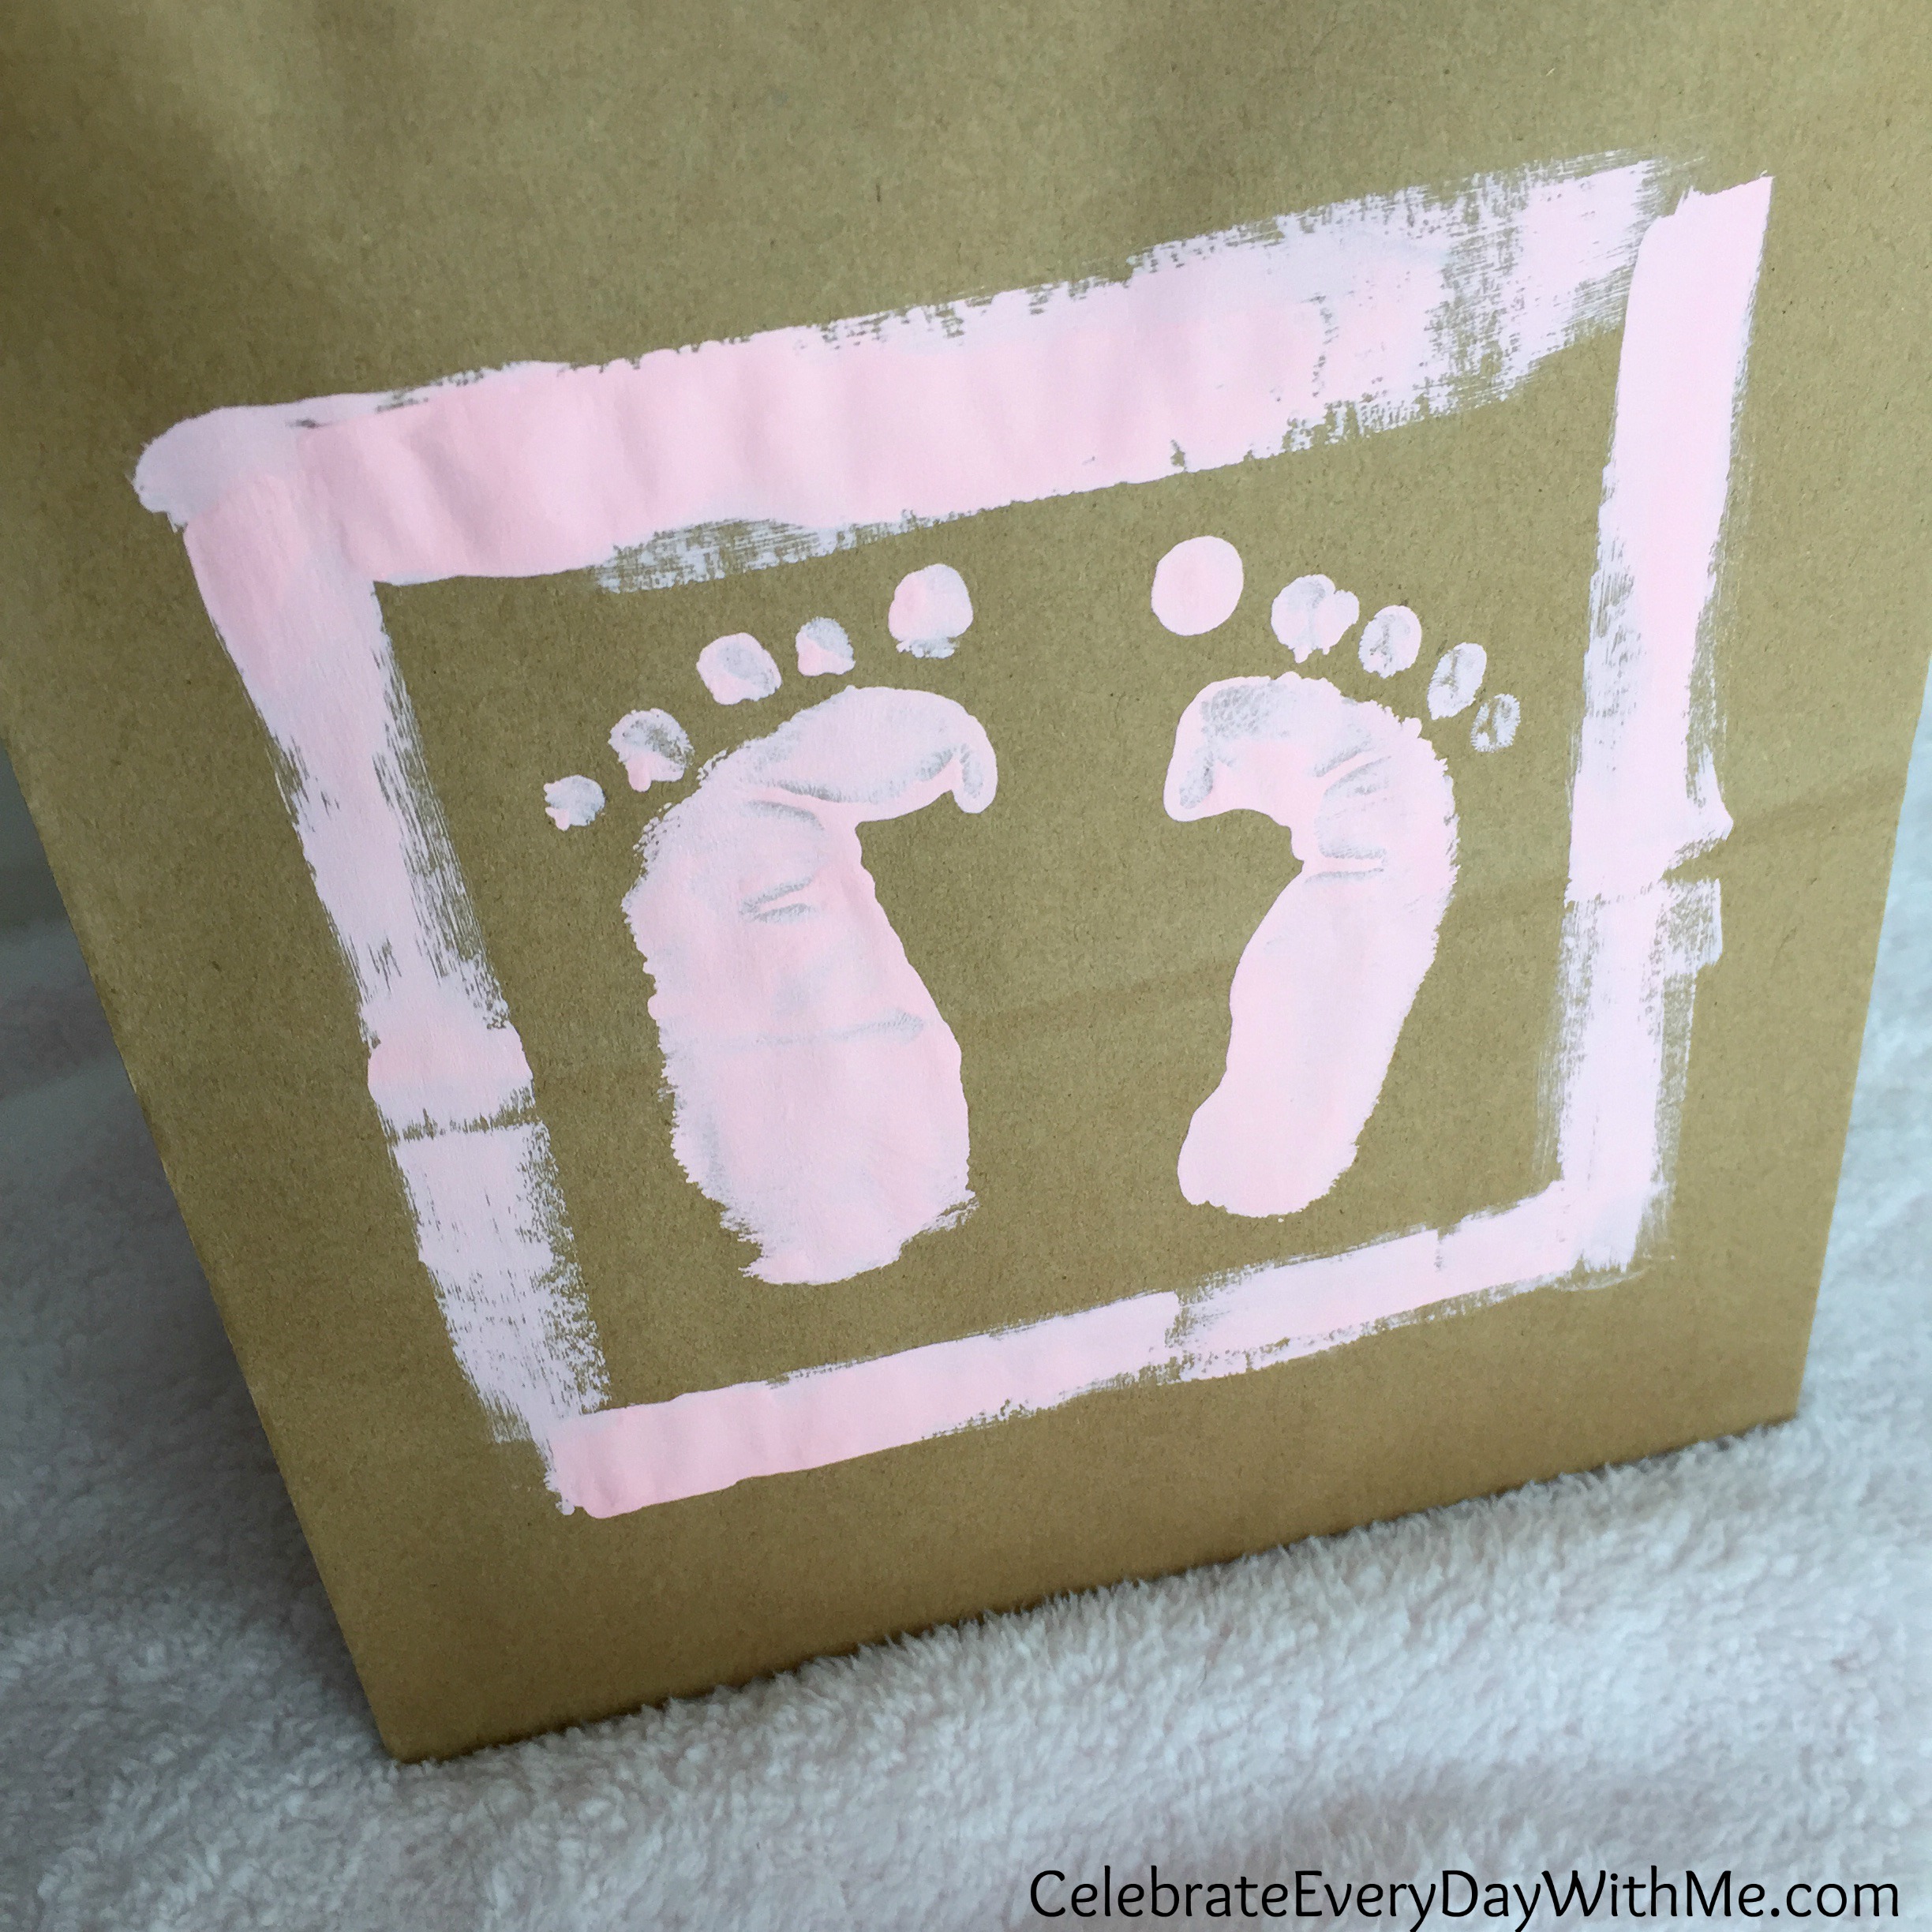 How to Make Baby Footprints with your Hand - Celebrate Every Day With Me